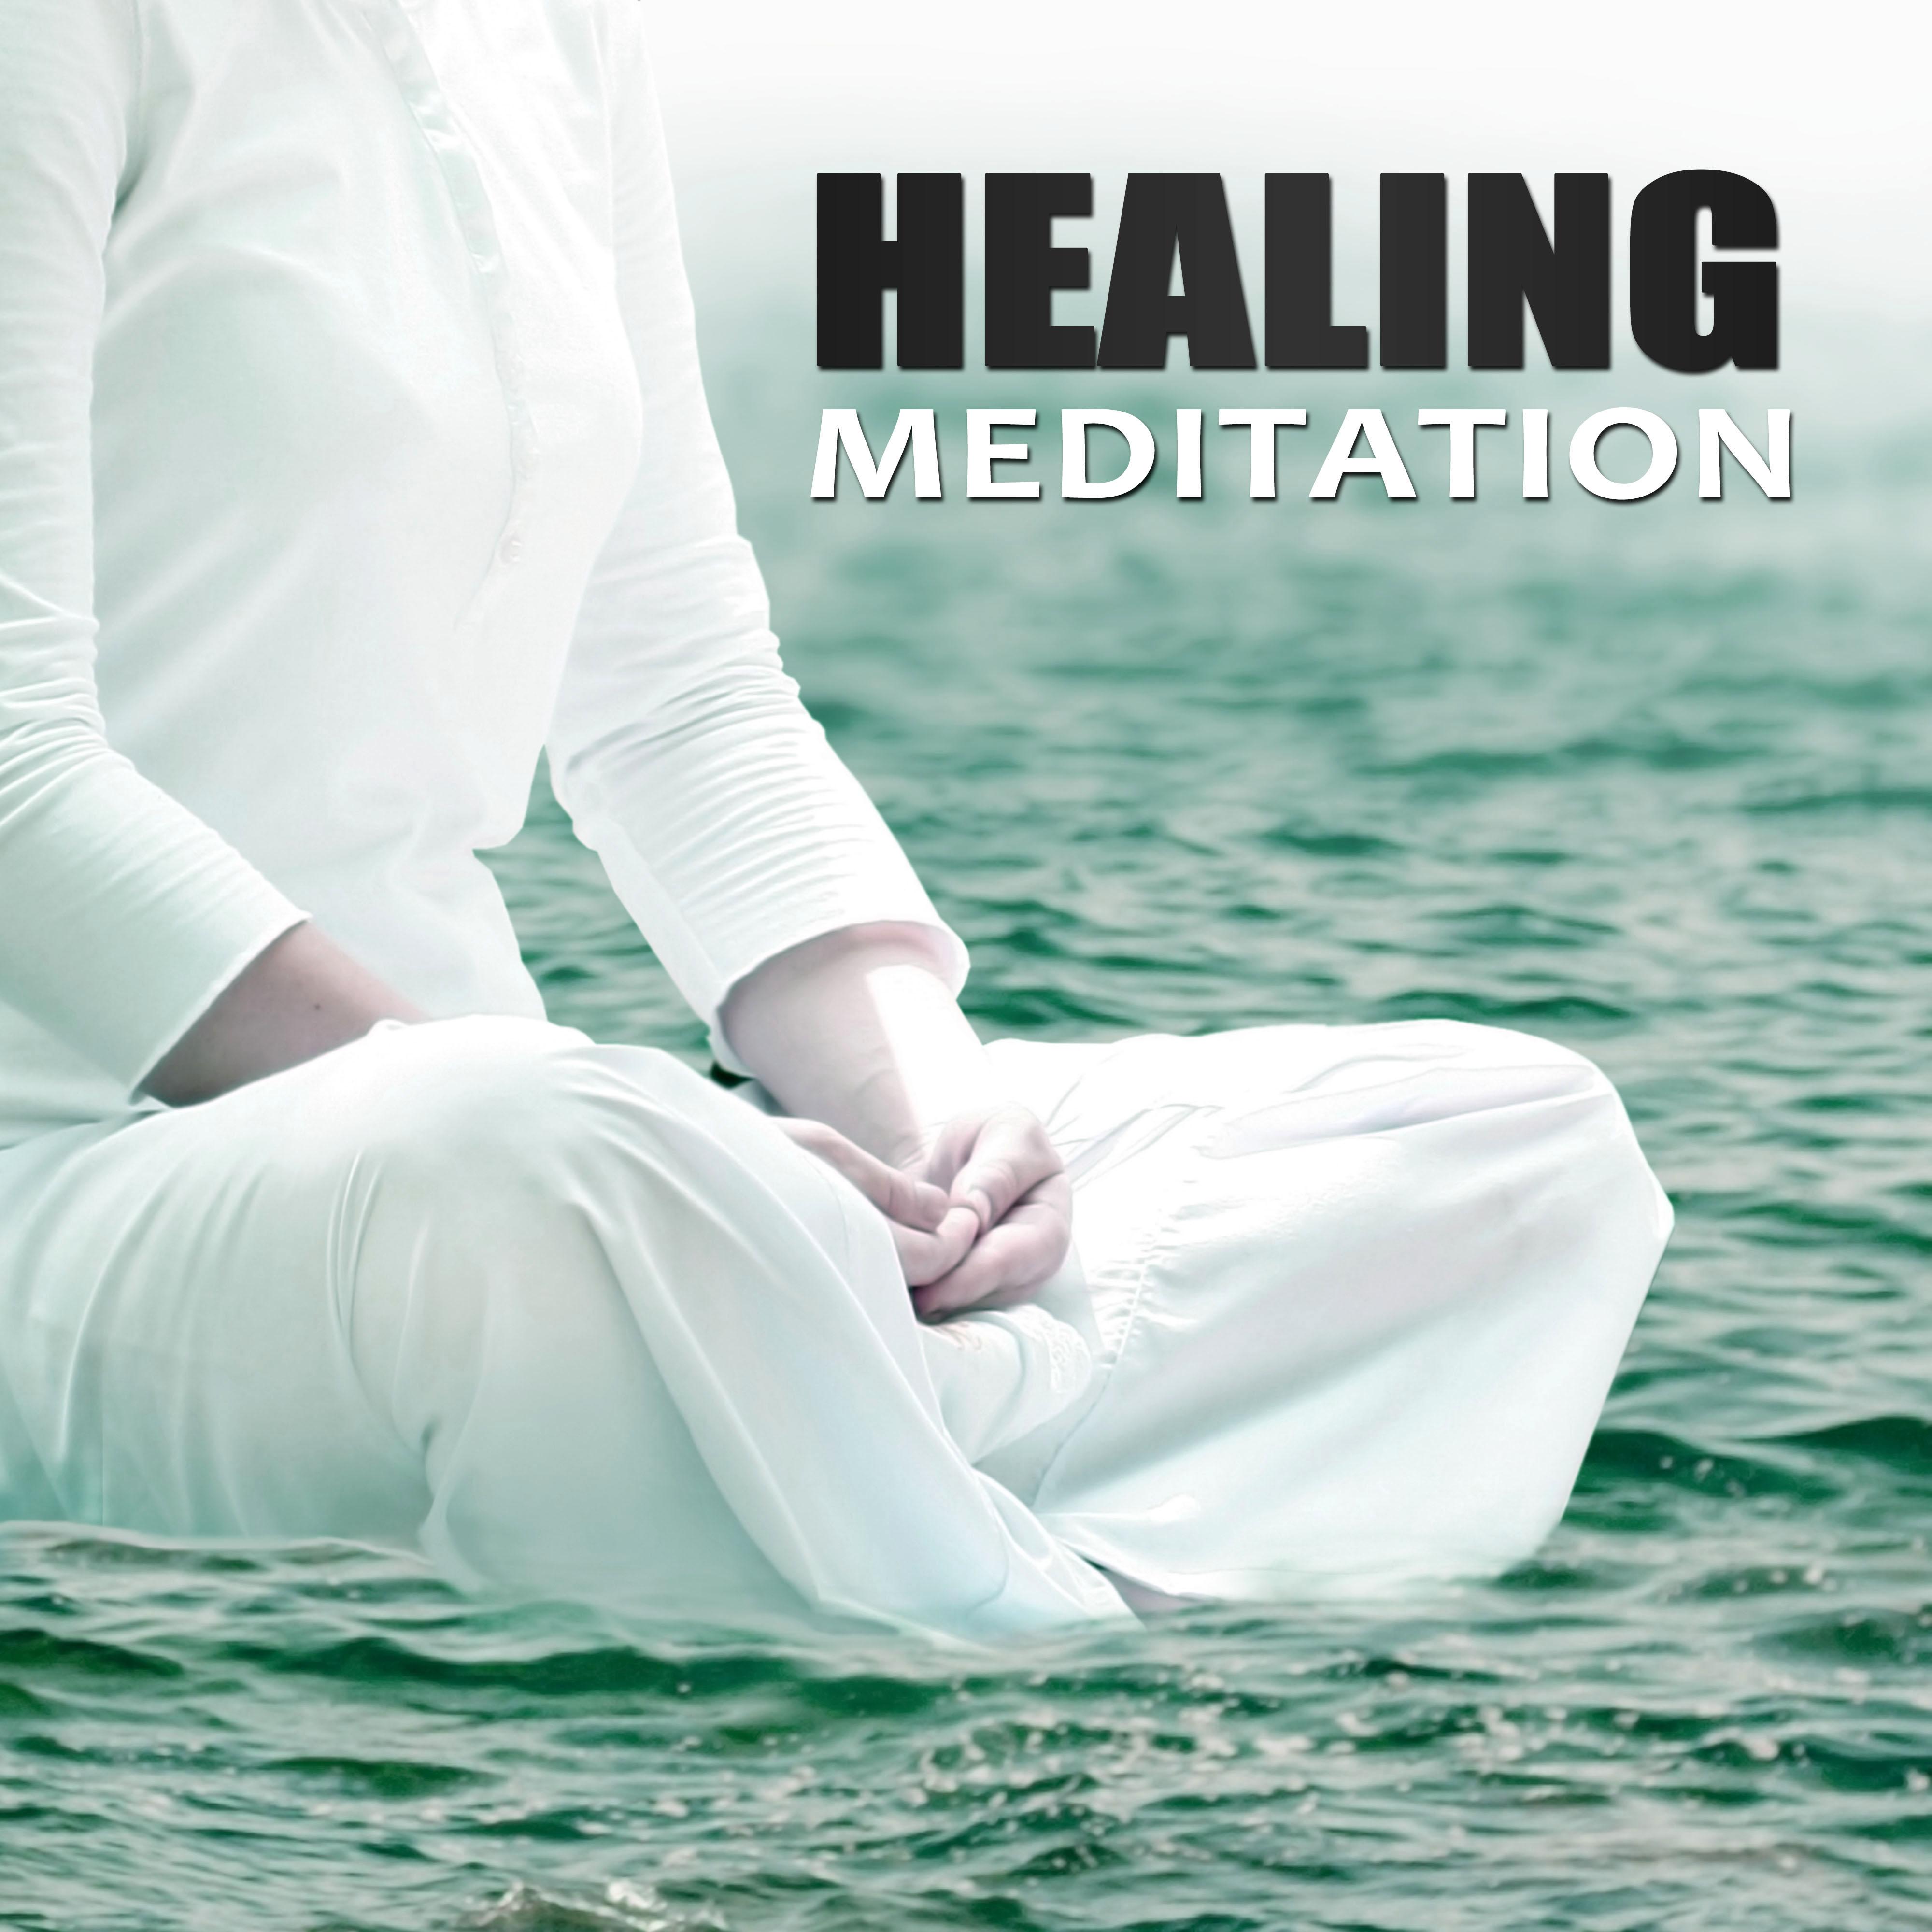 Healing Meditation – Relaxation Sounds, Music Therapy, Relax, Relief, Music for Yoga, Spirituality, Calm Meditation, New Age